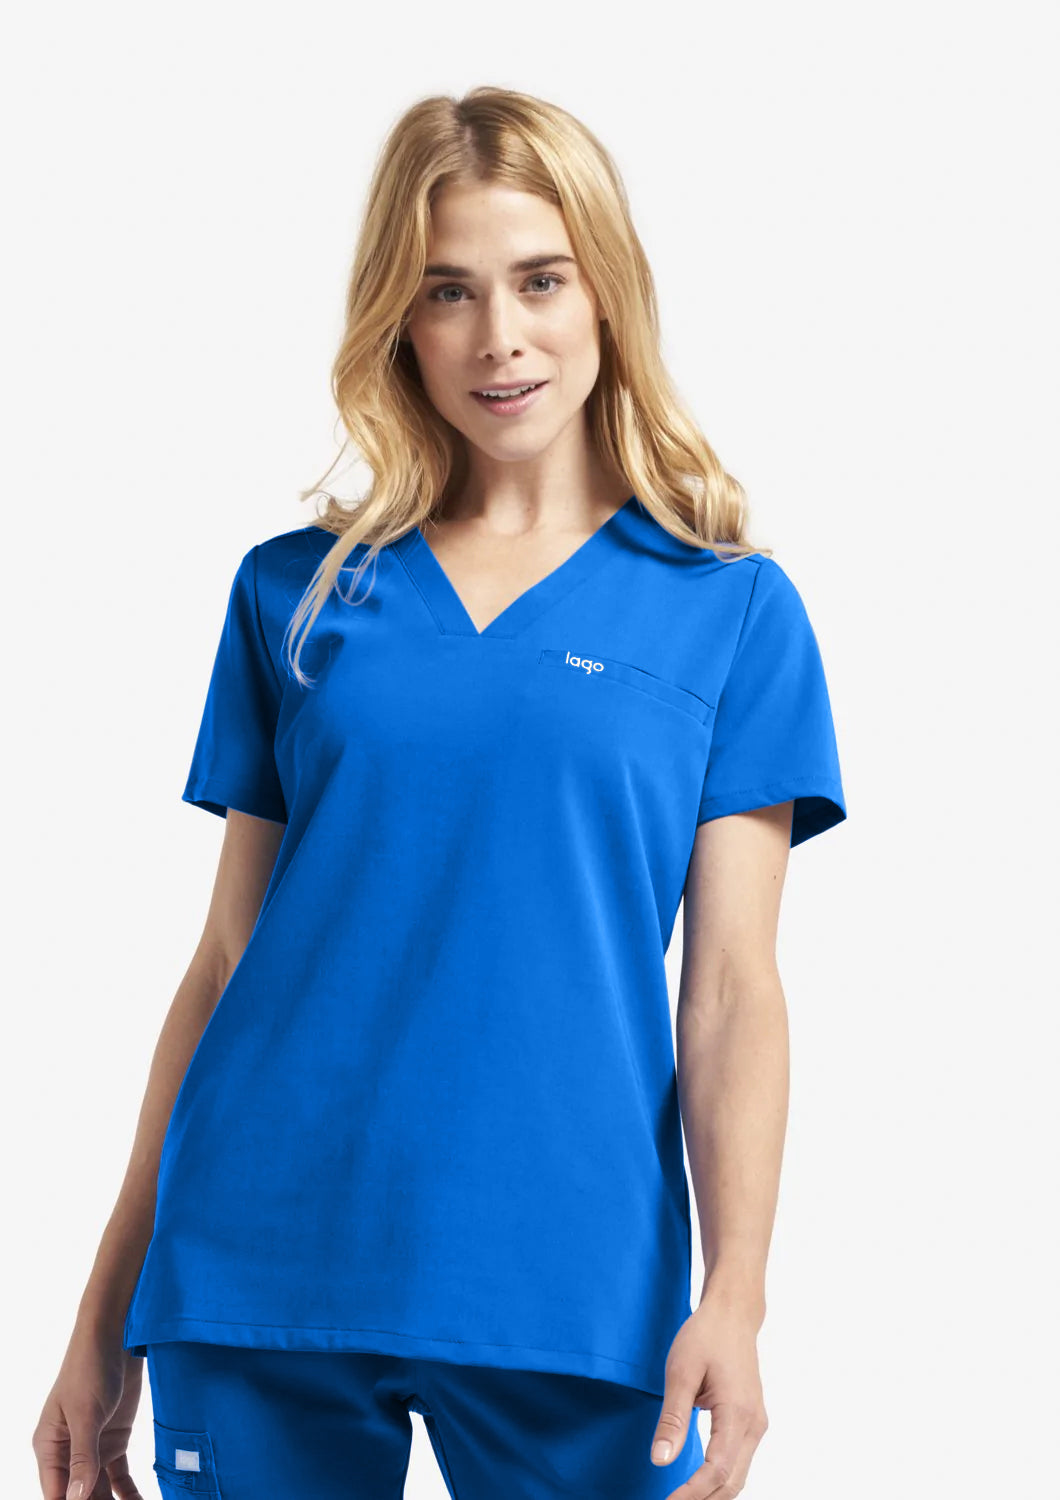 Gold Coast University Hospital - Midwife (4 Pocket Scrub Top and Cargo Pants  in Teal incl Logos)